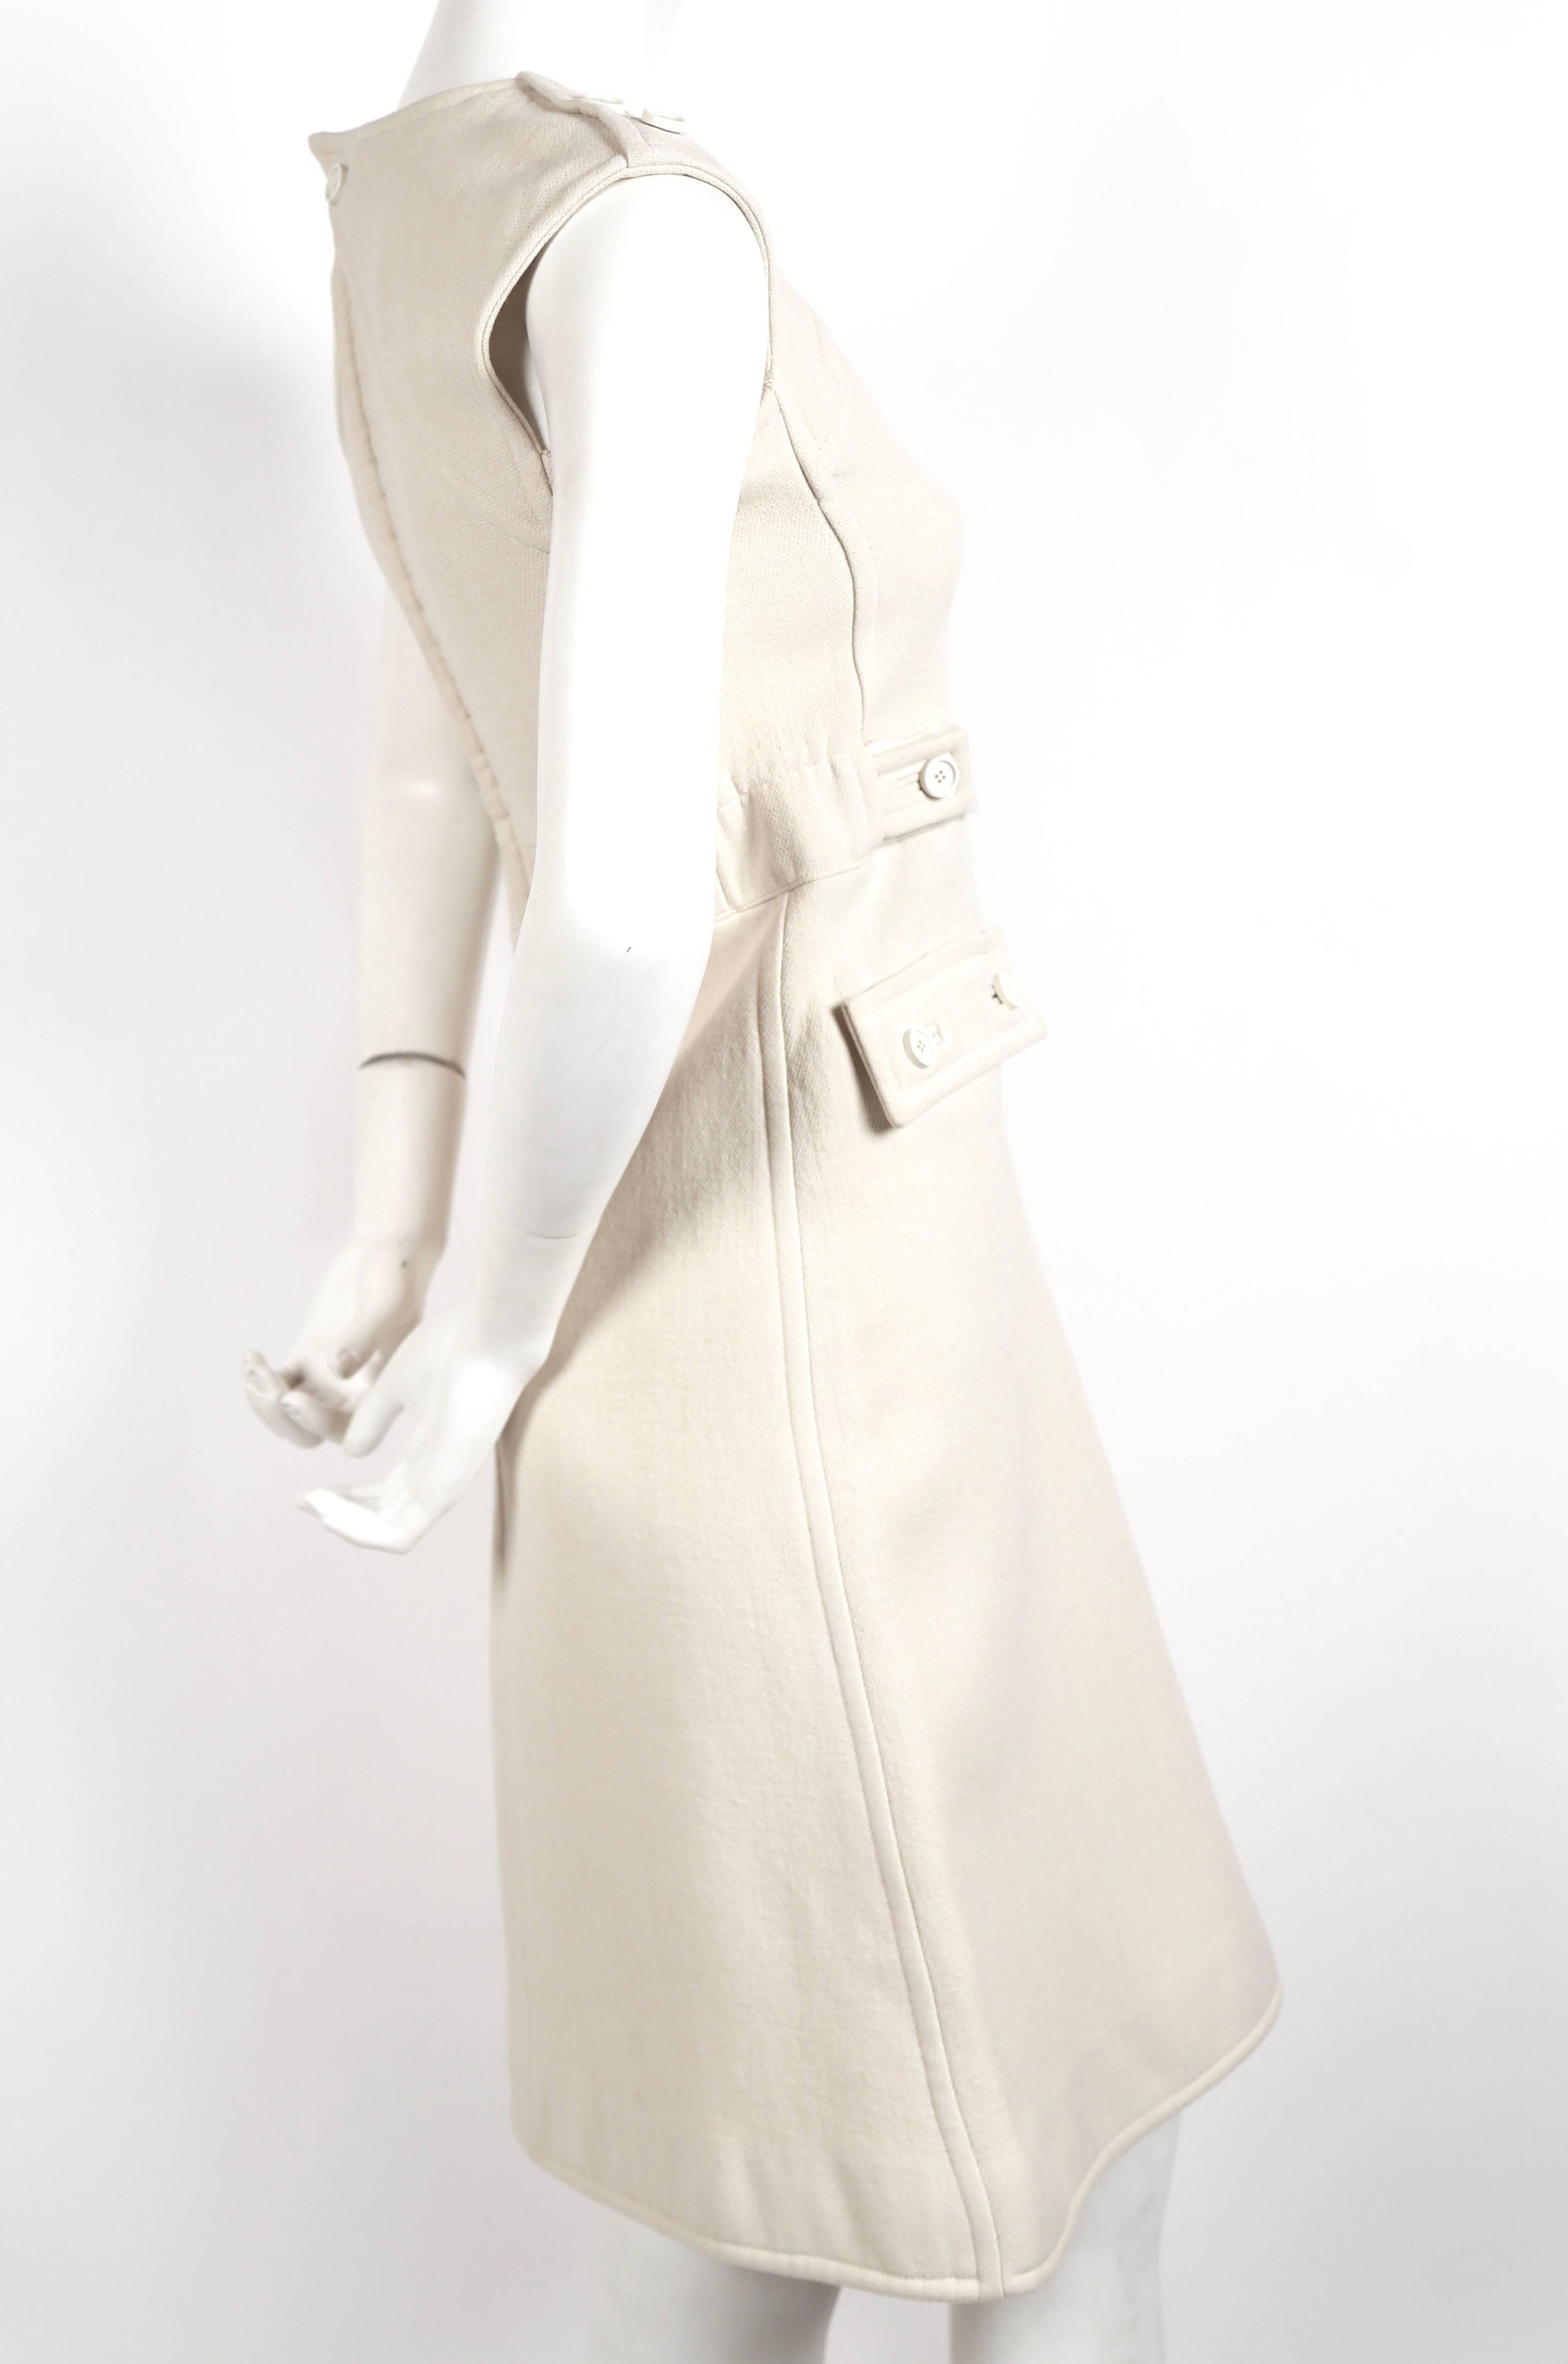 Off-white haute couture dress from Courreges dating to the 1960's. Dress best fits a size 0 or 2. Approximate measurements are as follows: bust 31